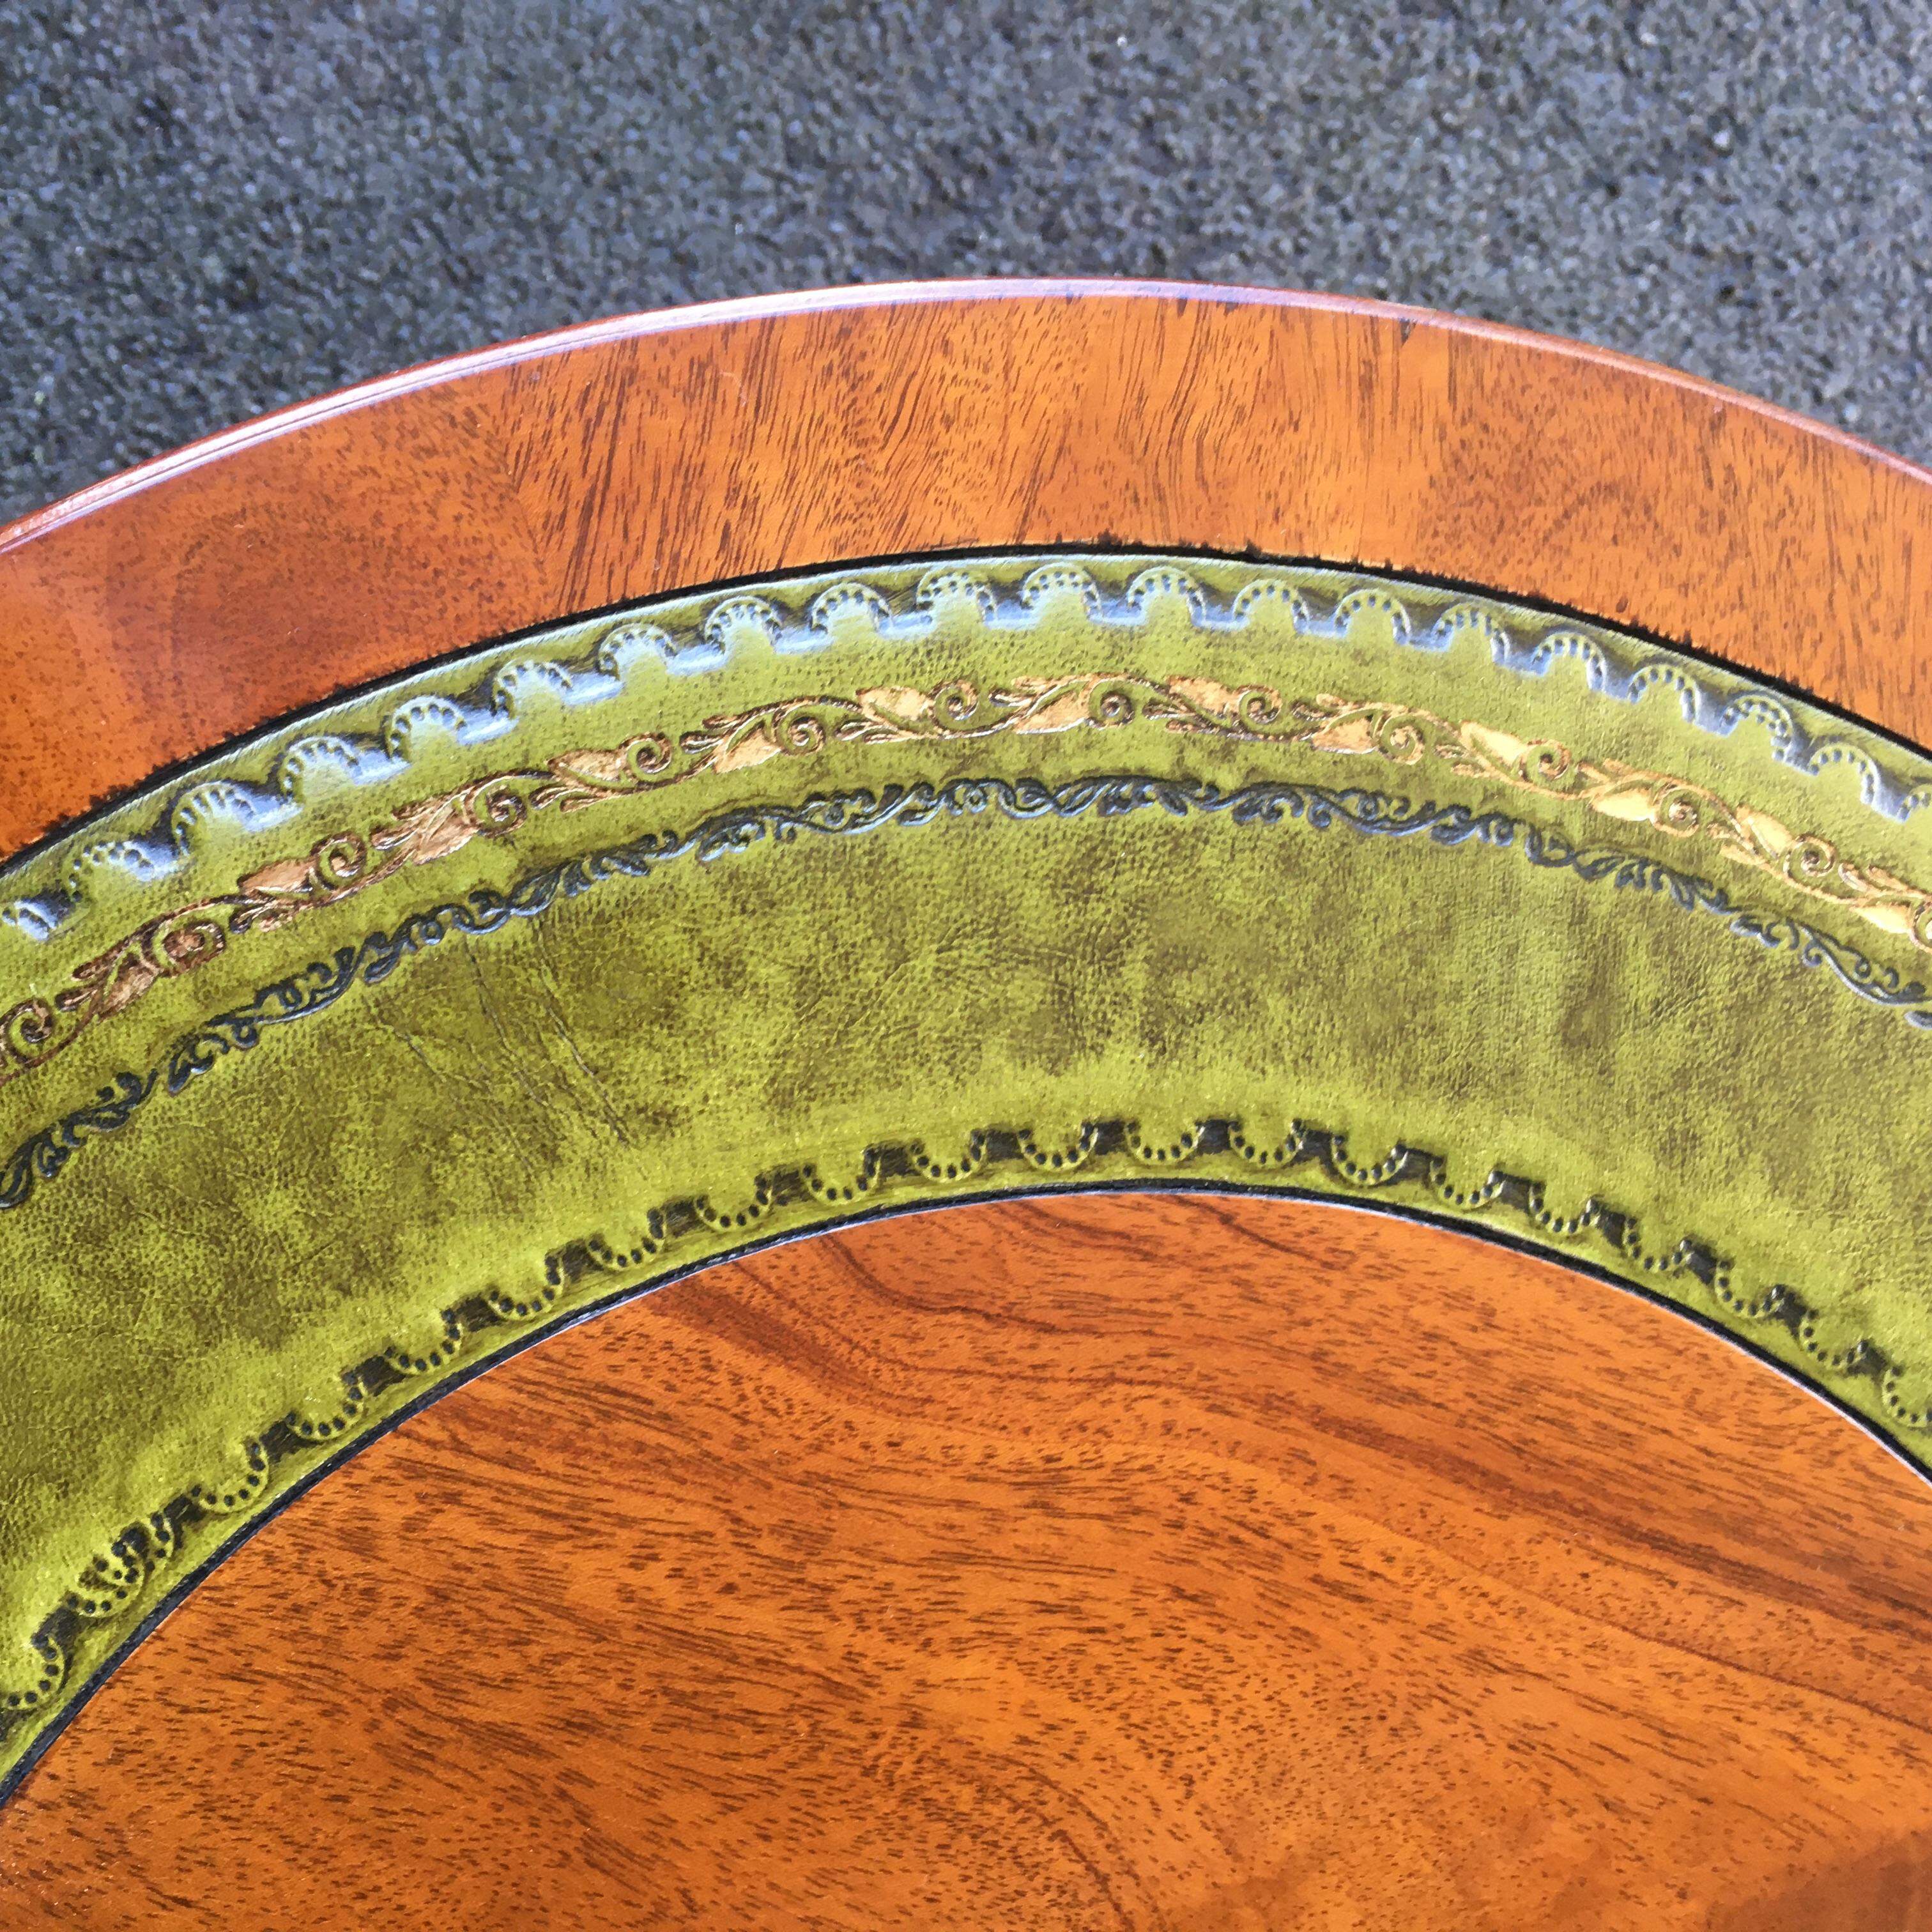 Pair of 20th Century Mahogany Tables with Leather Inset with Glass Tops